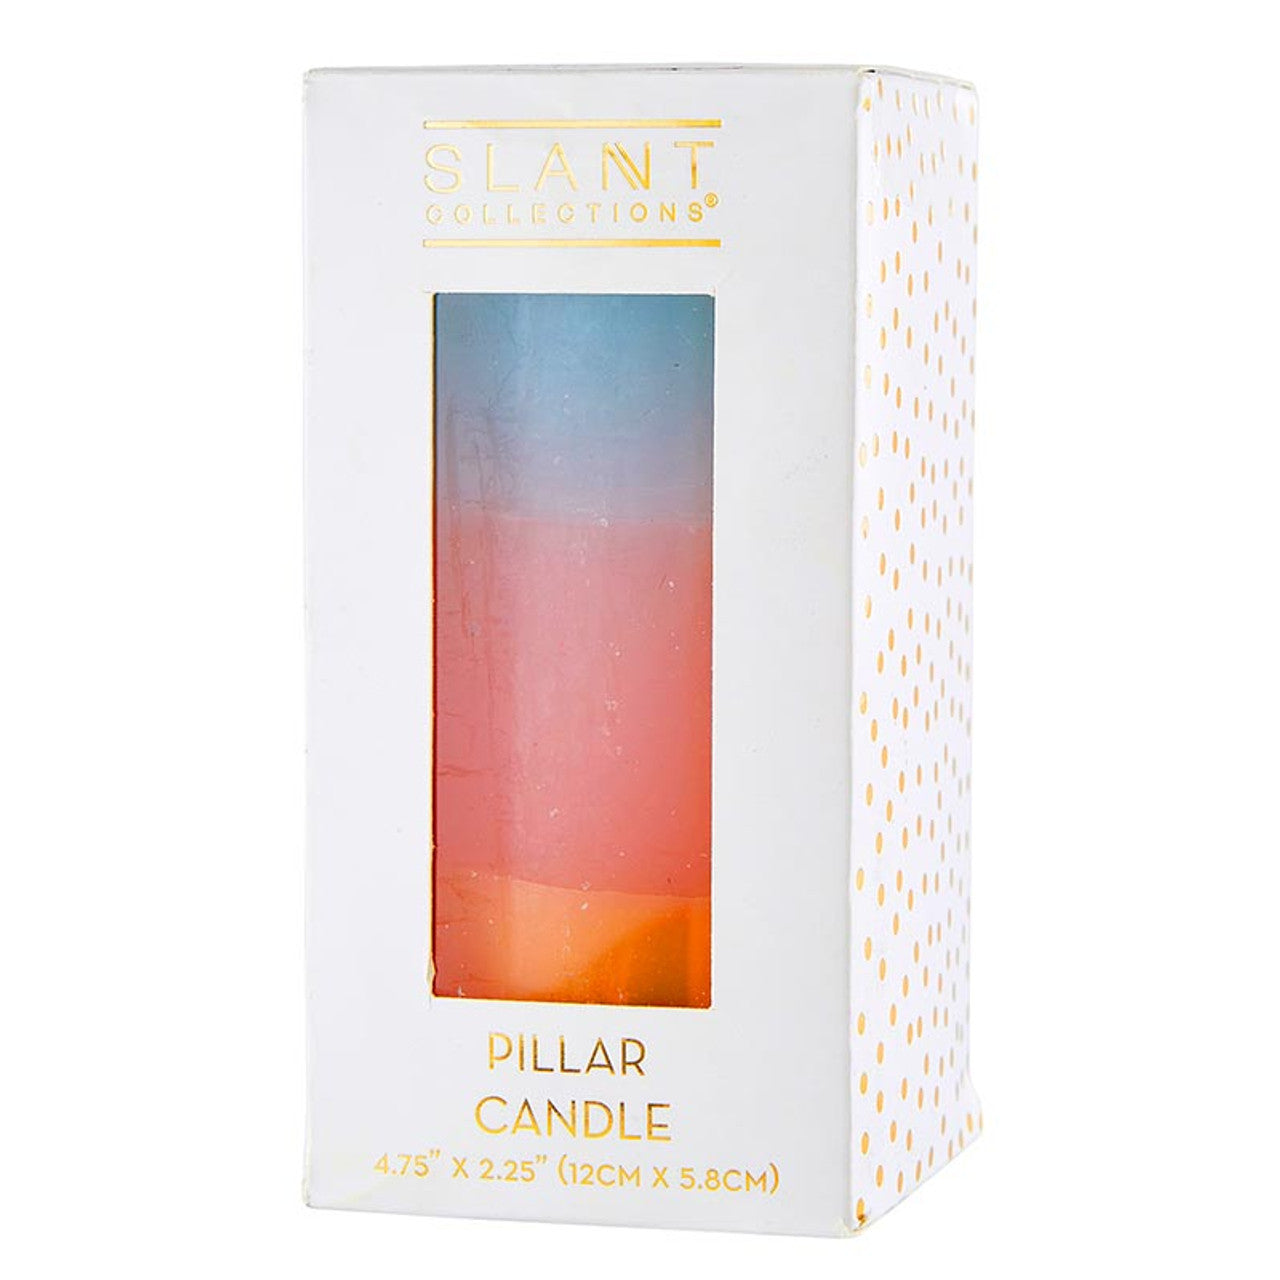 Mini Pillar Candle in Blue Pink Orange | Tri-Colored Ombre Aesthetic Table Candle 4.75"